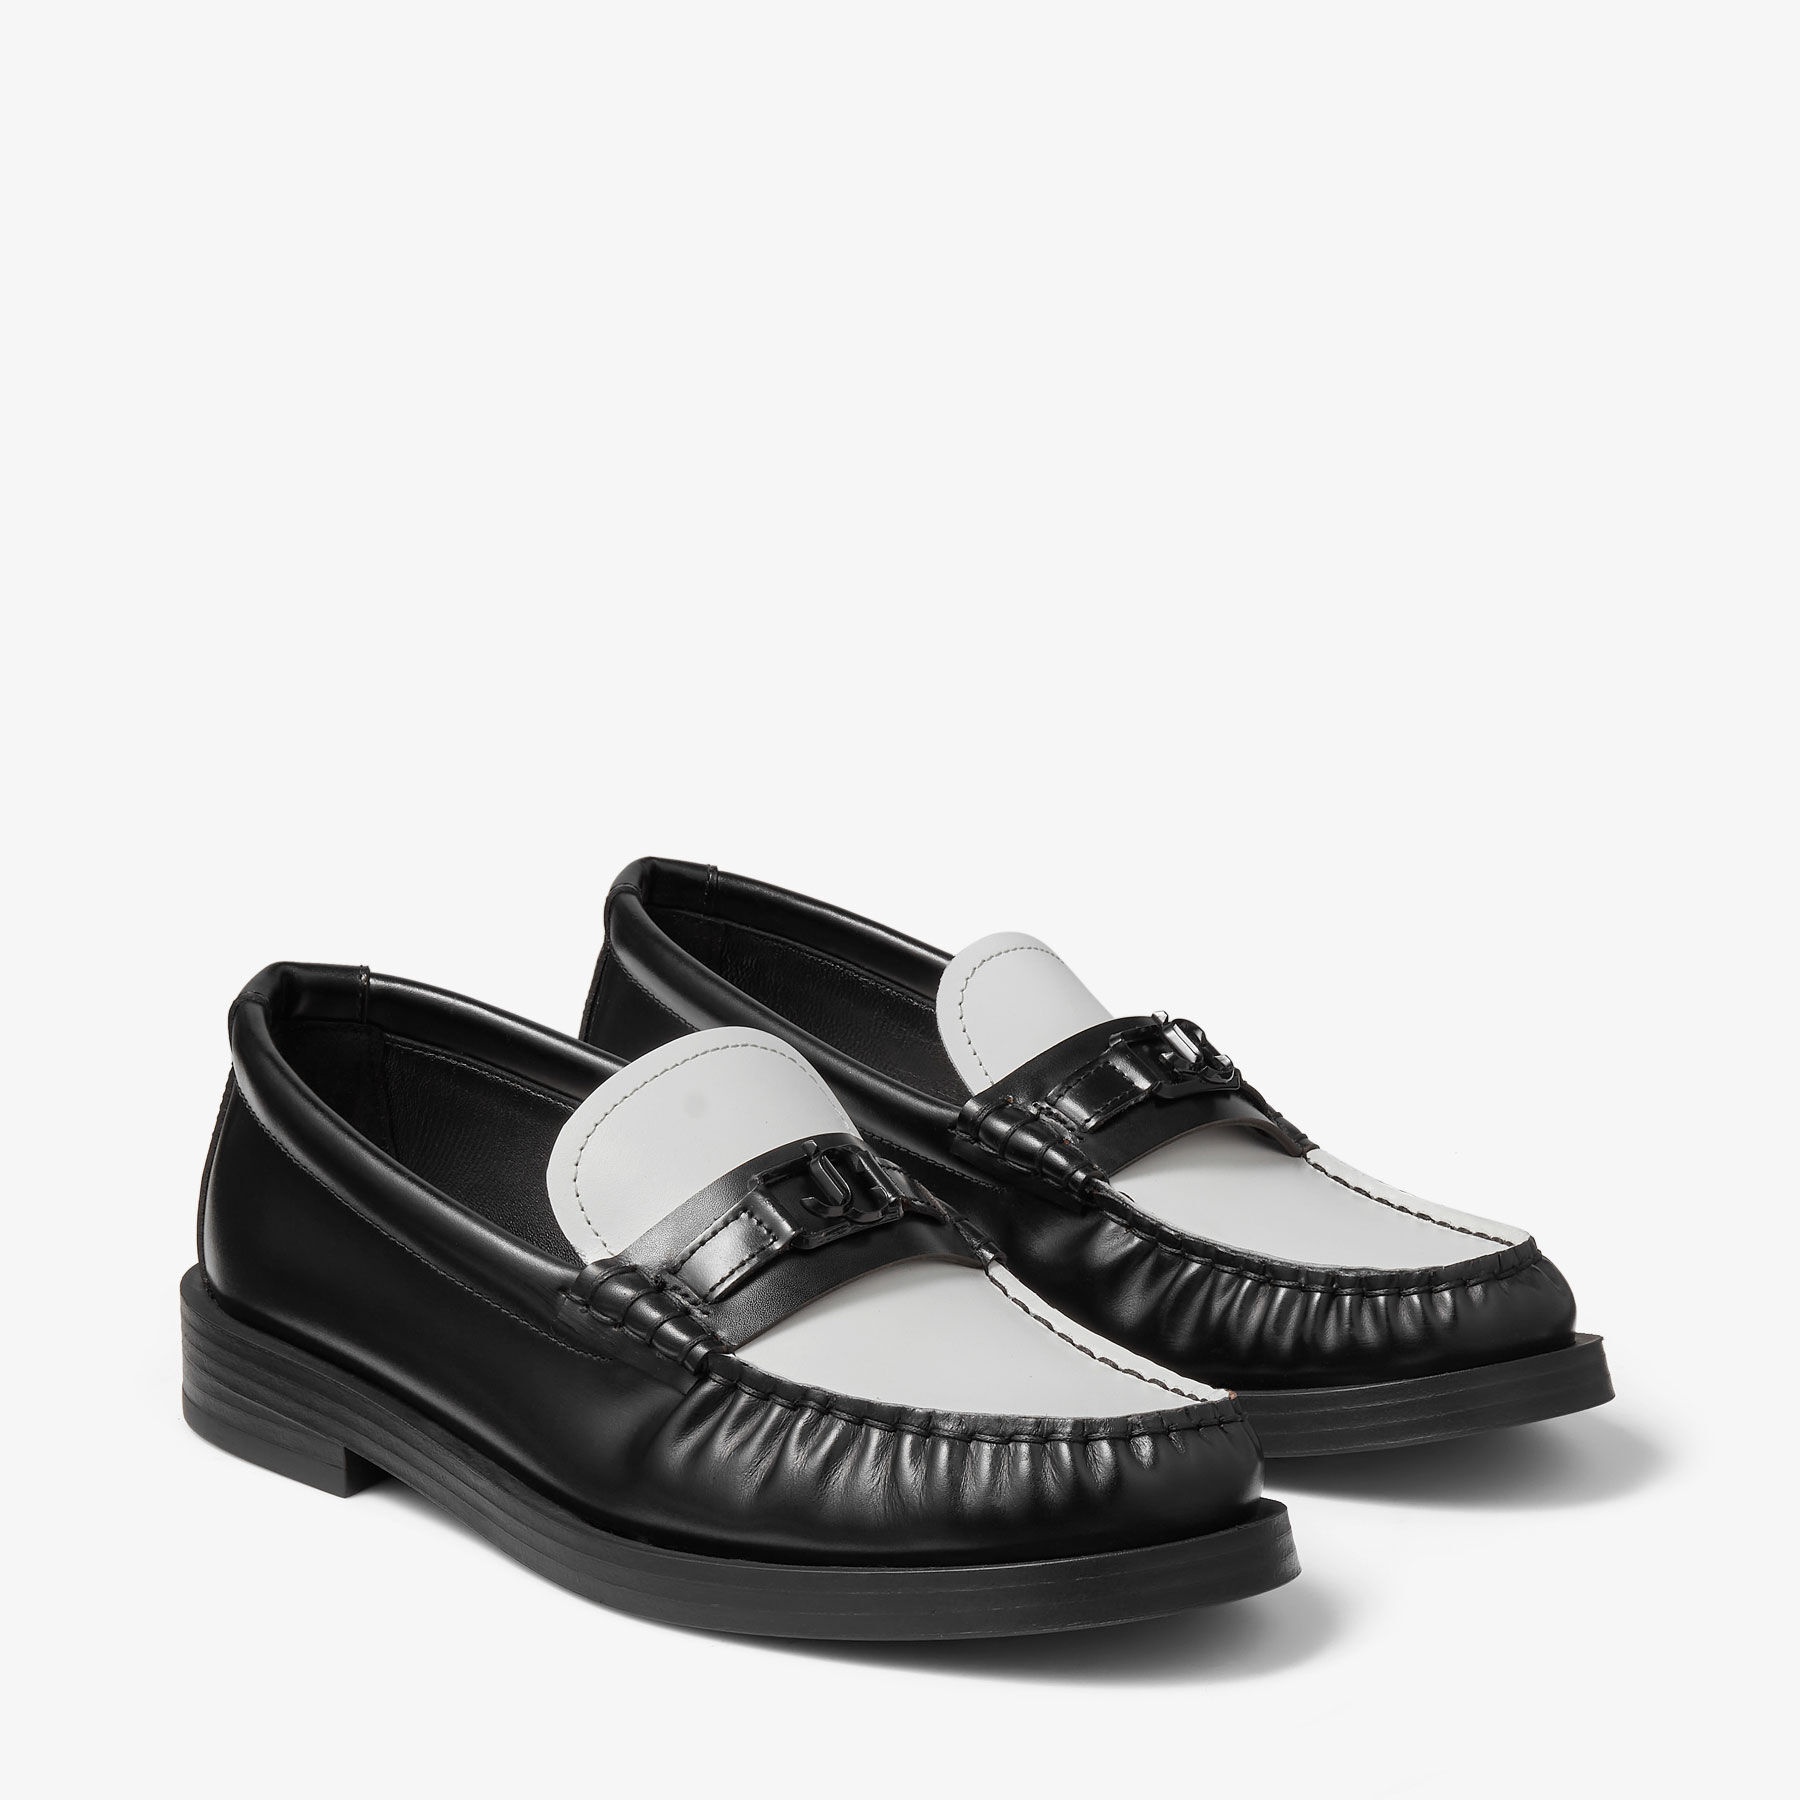 Addie/JC
Black and Latte Box Calf Leather Flat Loafers with JC Emblem - 2